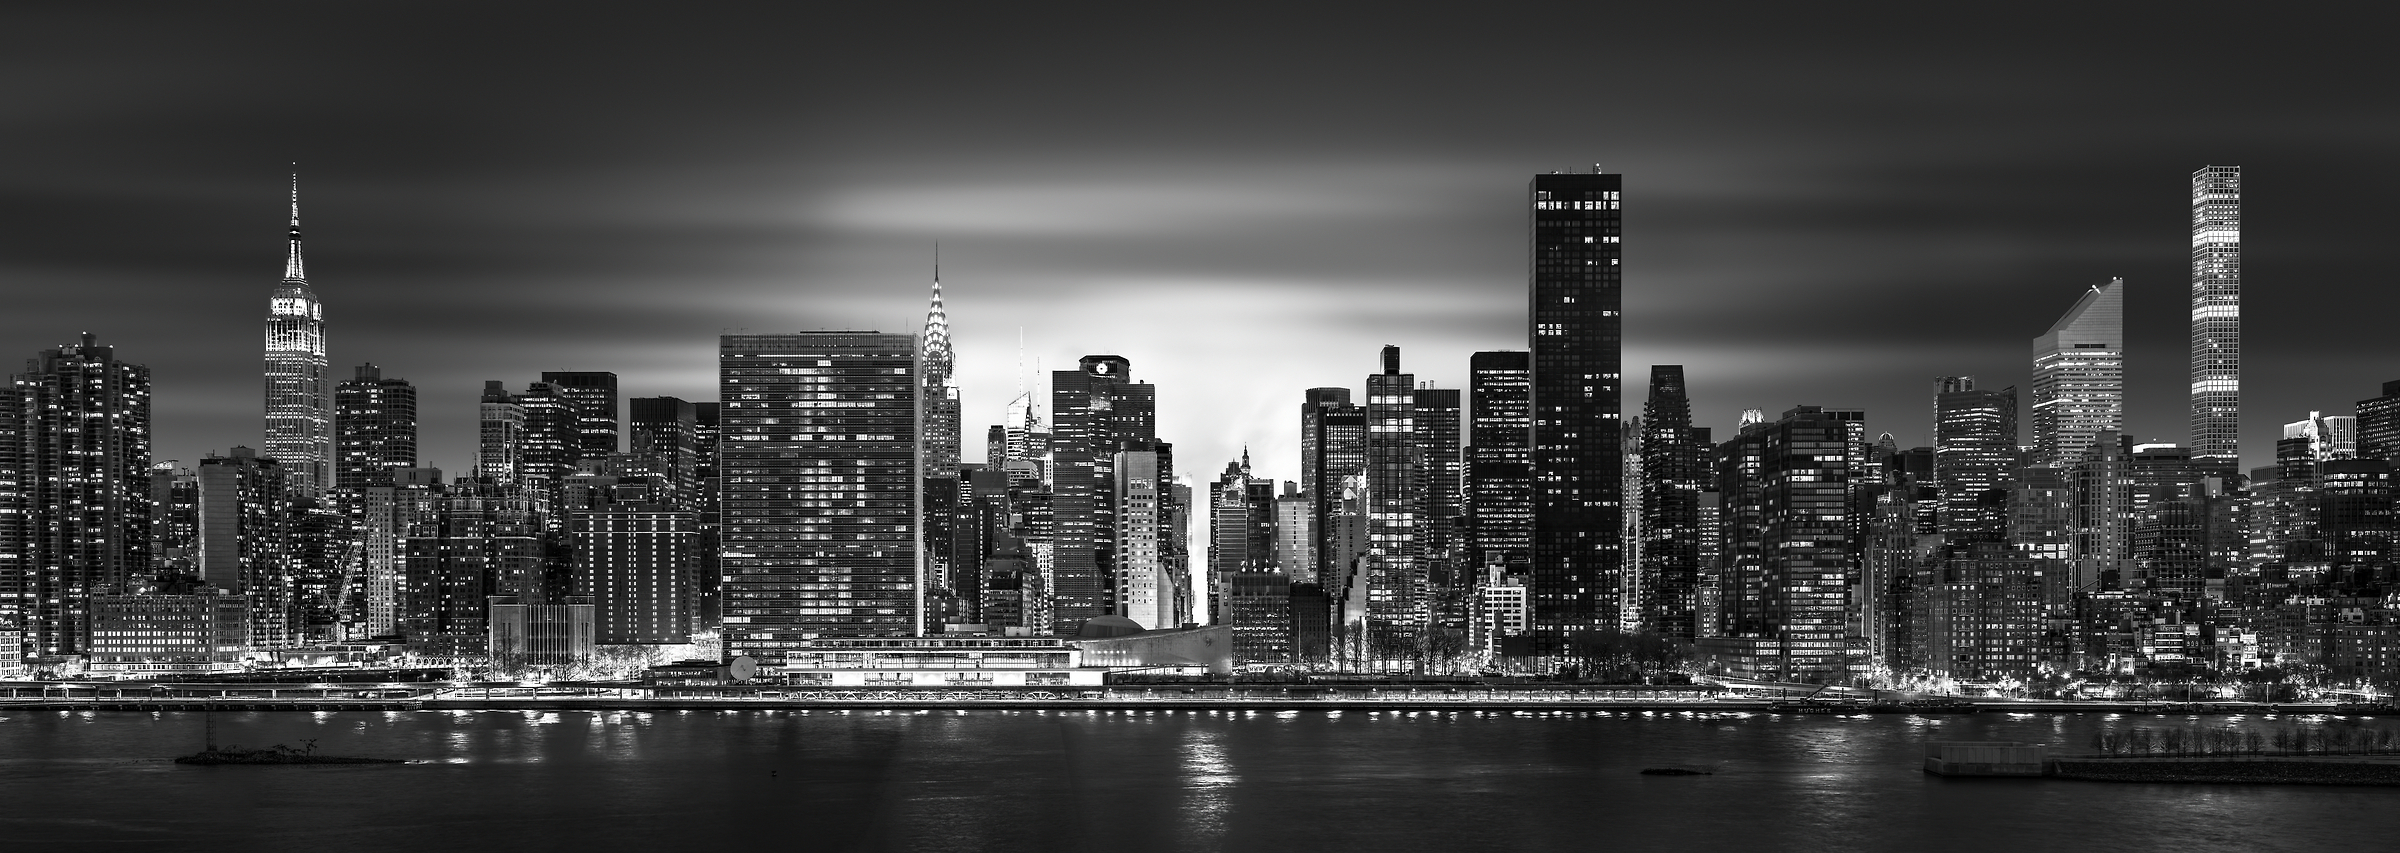 4,122 megapixels! A very high resolution, large-format VAST photo print of the NYC skyline at night with the East River; cityscape photo created by Dan Piech.